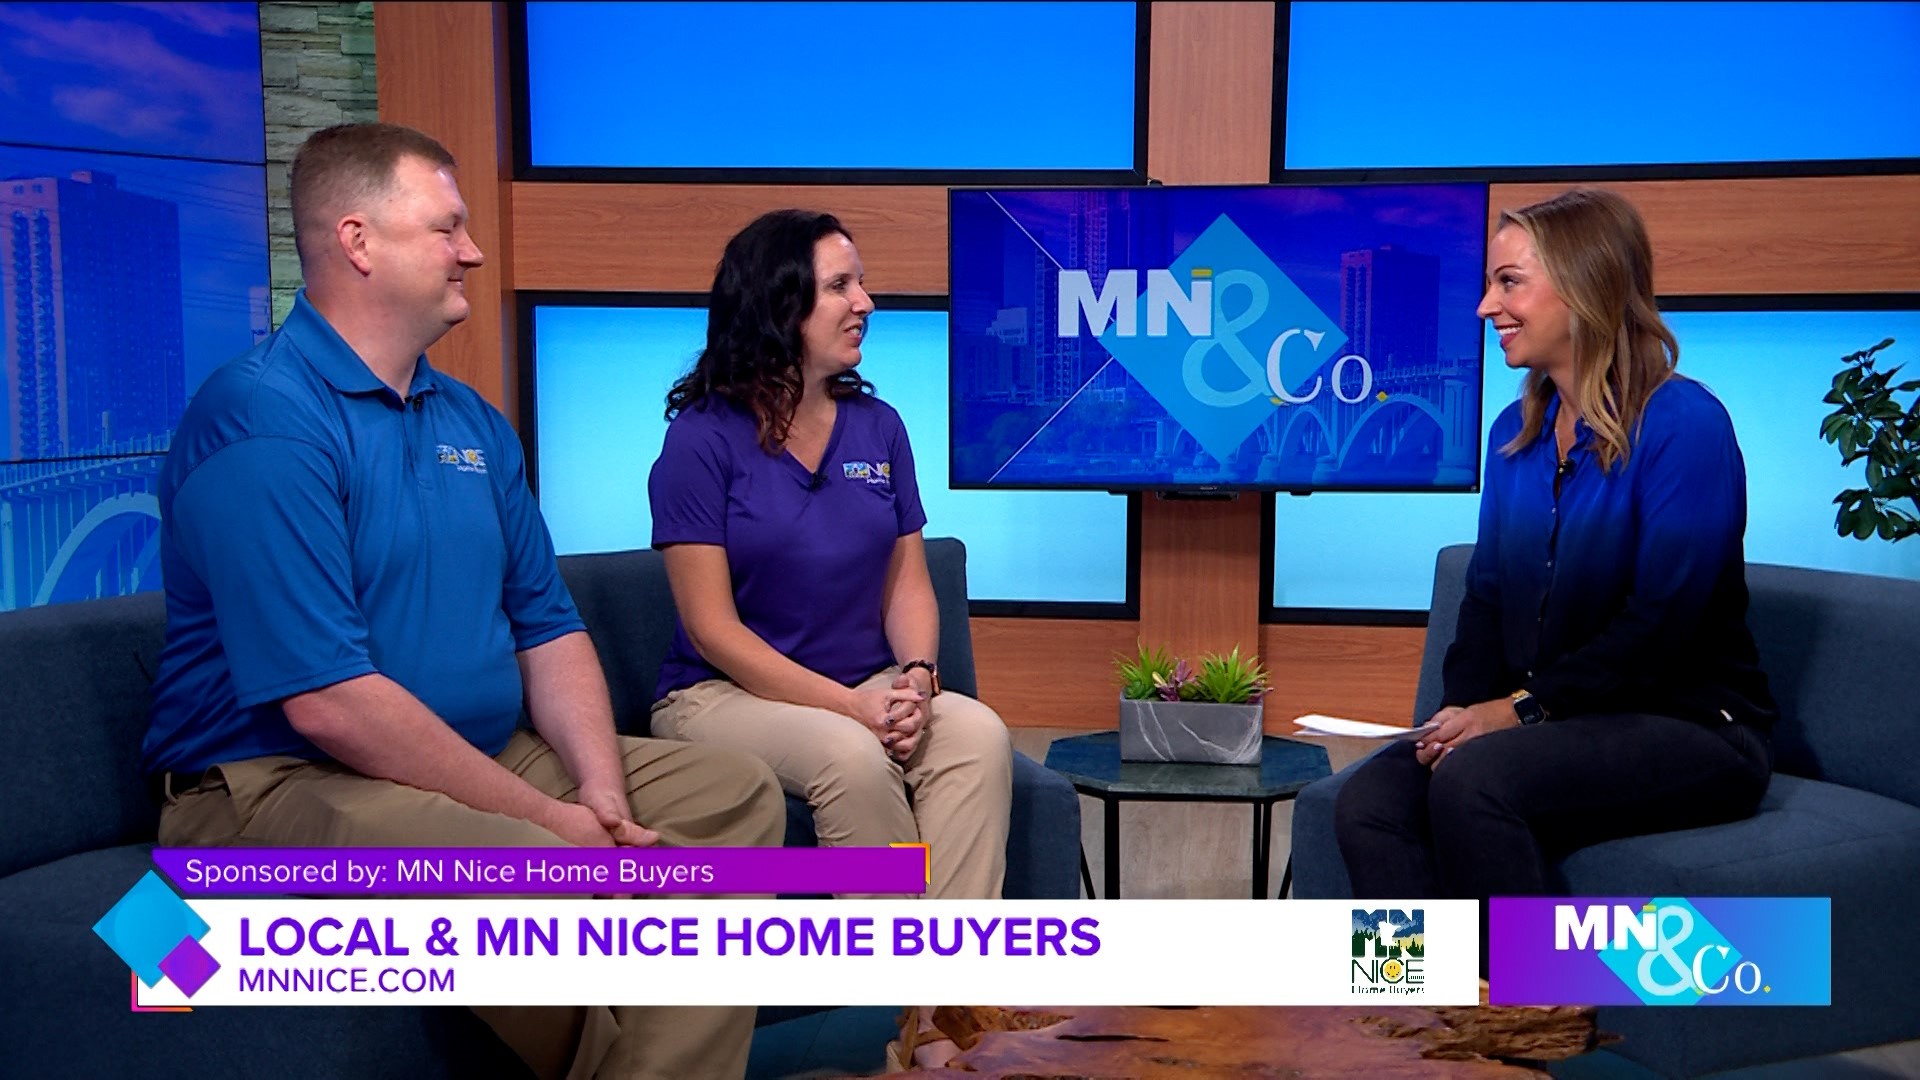 Minnesota Nice Home Buyers joins Minnesota and Company to discuss their process of helping sellers sell their homes quickly for cash.